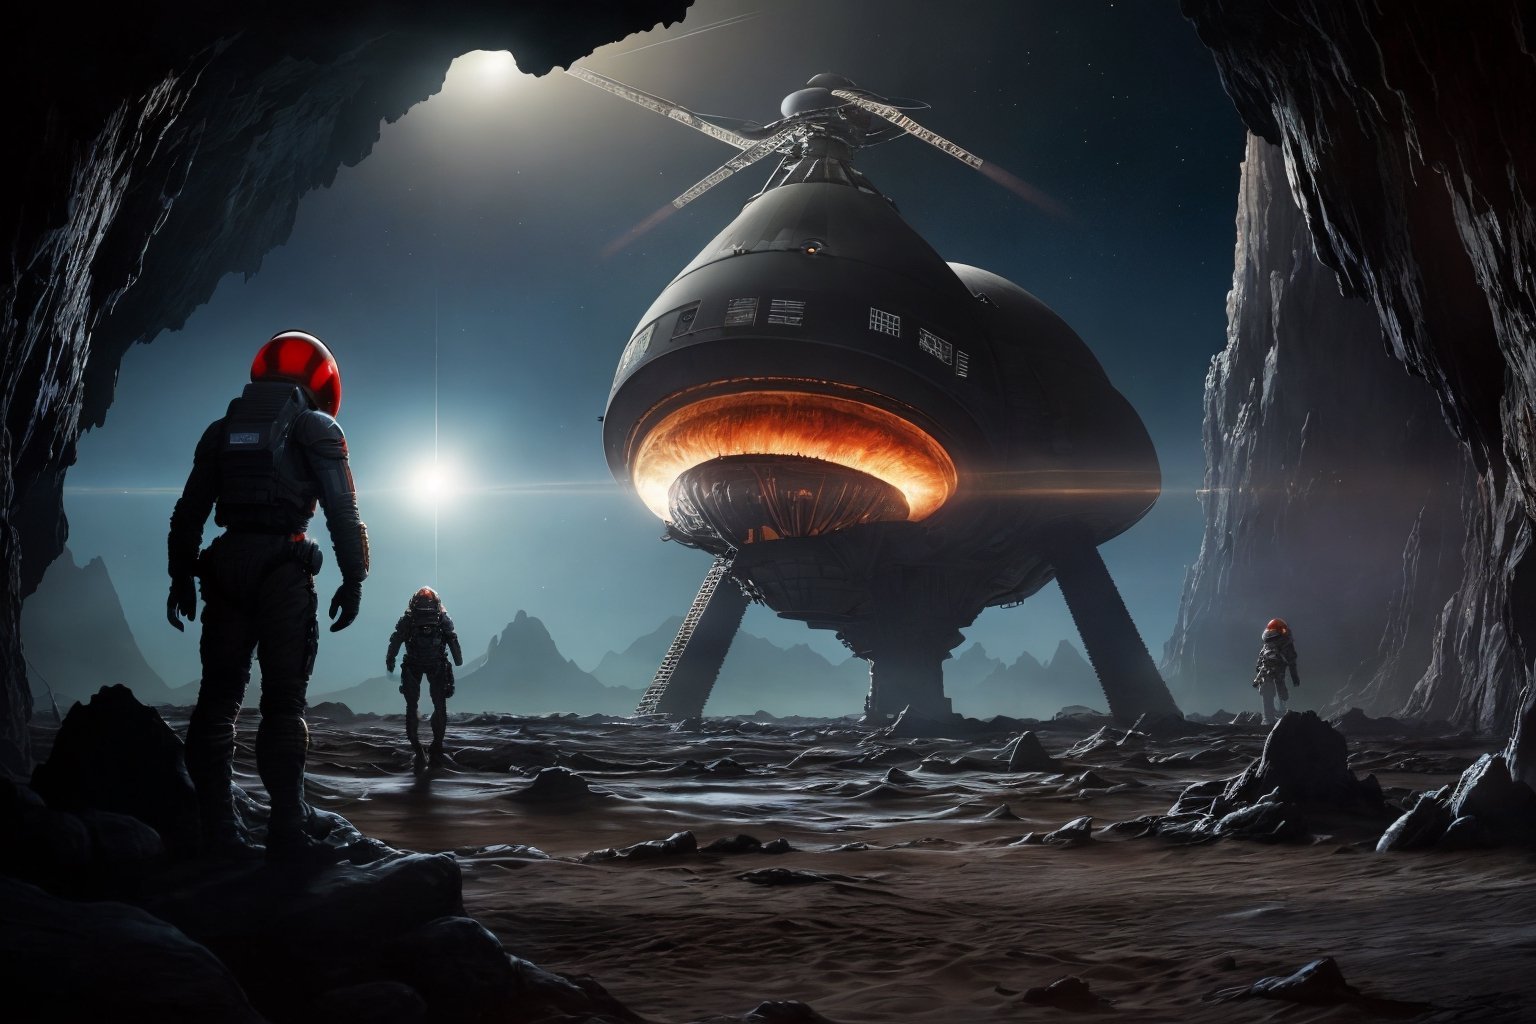 
Create a pulp sci-fi style scene where a Martian planet alien creature emerges from a cave, gazing up at the sky as a large space craft descends towards the planet. The creature, defenseless against the advanced technology of the spacecraft, watches as savage men from aboard the craft prepare to land. Capture the sense of wonder, fear, and impending conflict in this scene.